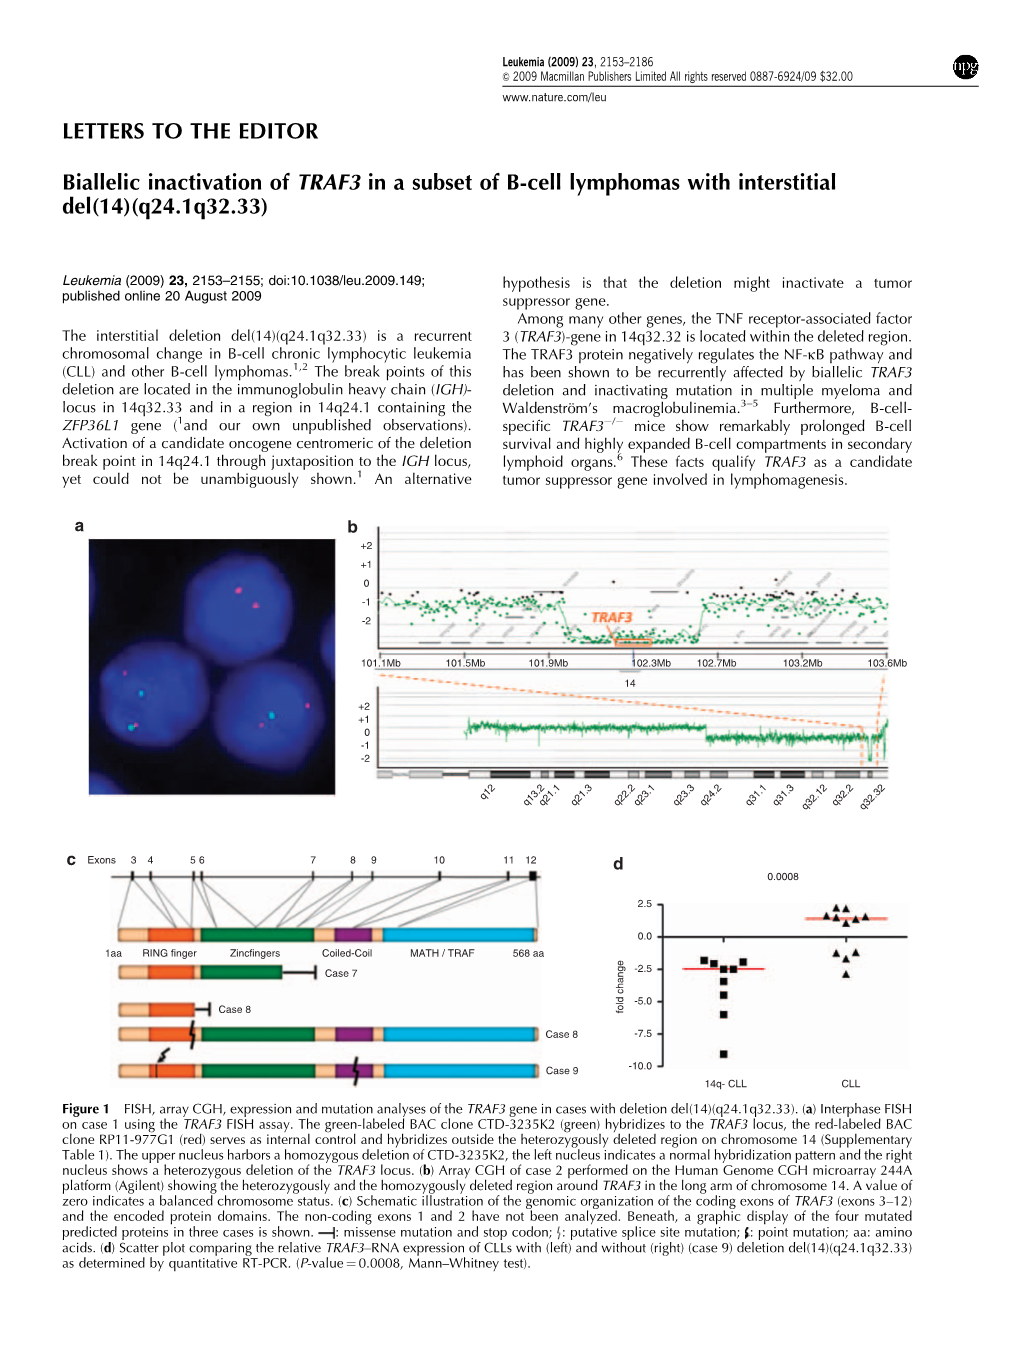 Biallelic Inactivation of TRAF3 in a Subset of B-Cell Lymphomas with Interstitial Del(14)(Q24.1Q32.33)